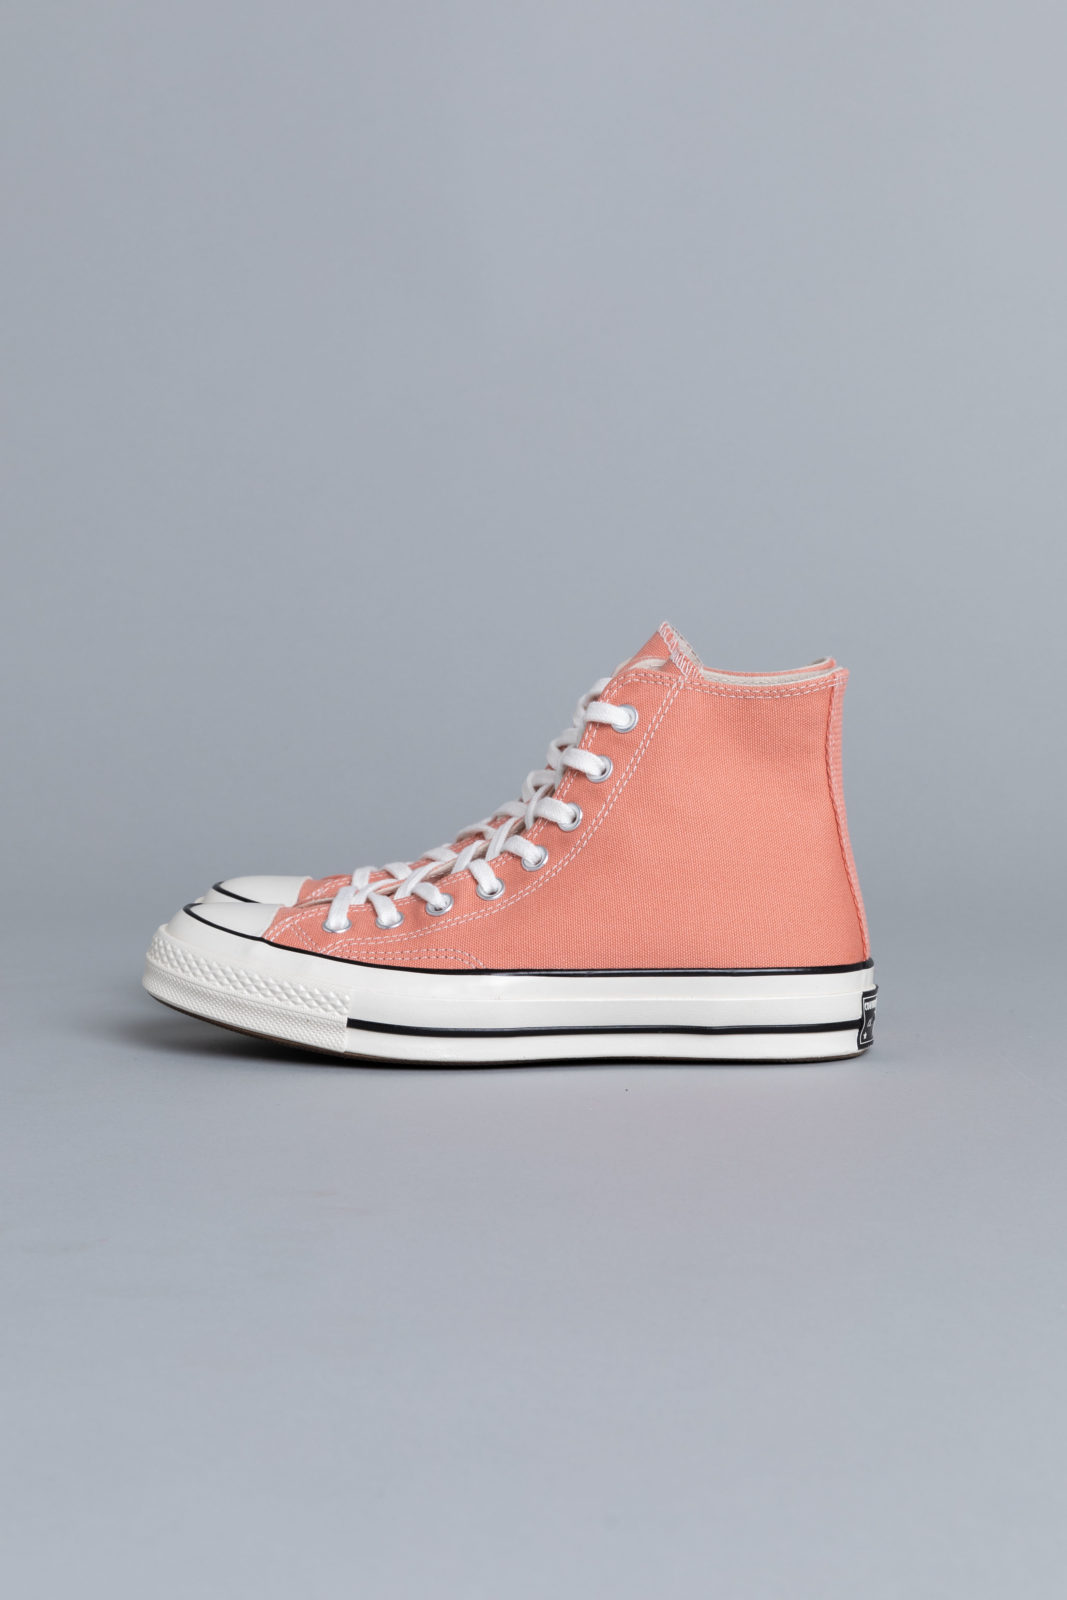 converse peached